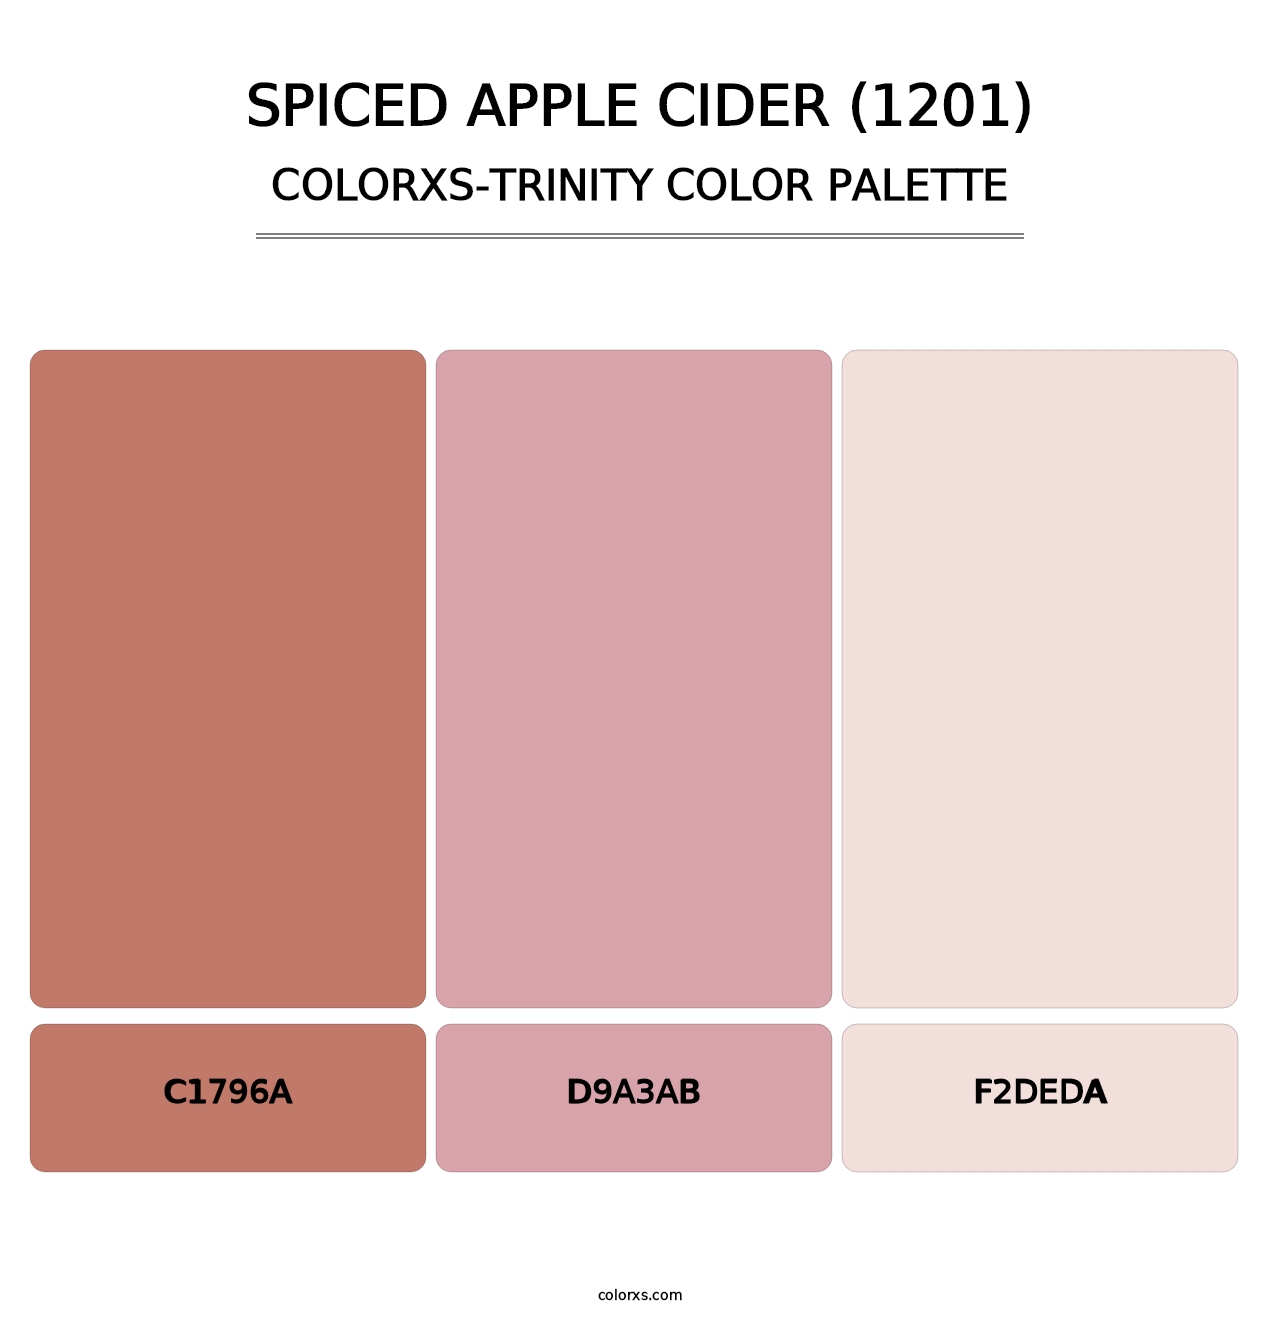 Spiced Apple Cider (1201) - Colorxs Trinity Palette